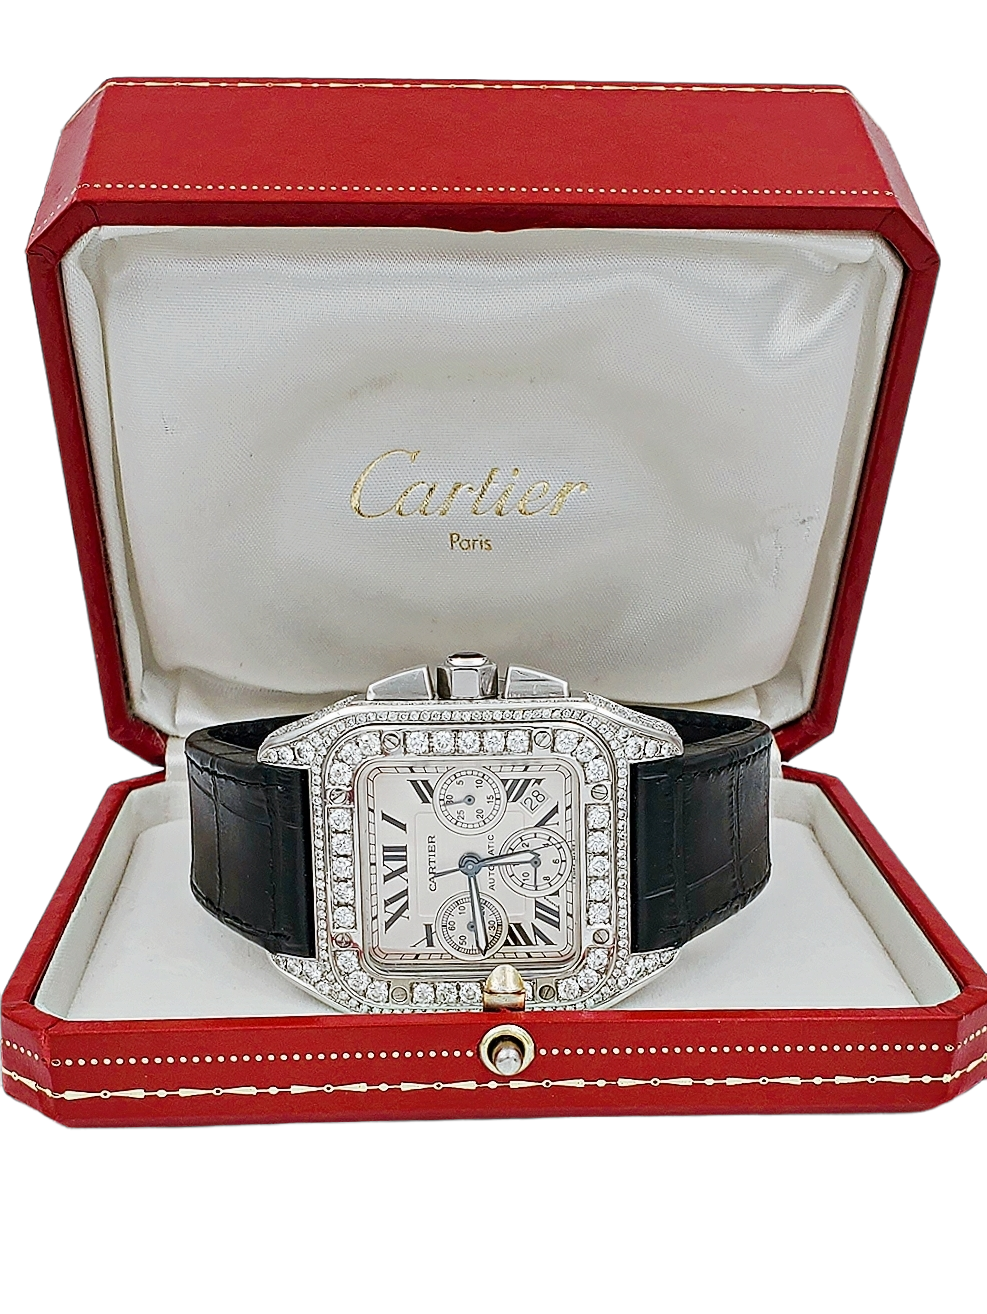 Men's Cartier 48mm Santos XL Chronograph Watch with Black Leather Band, Roman Numeral White Dial and Diamond Bezel. (Pre-Owned W20090X8)